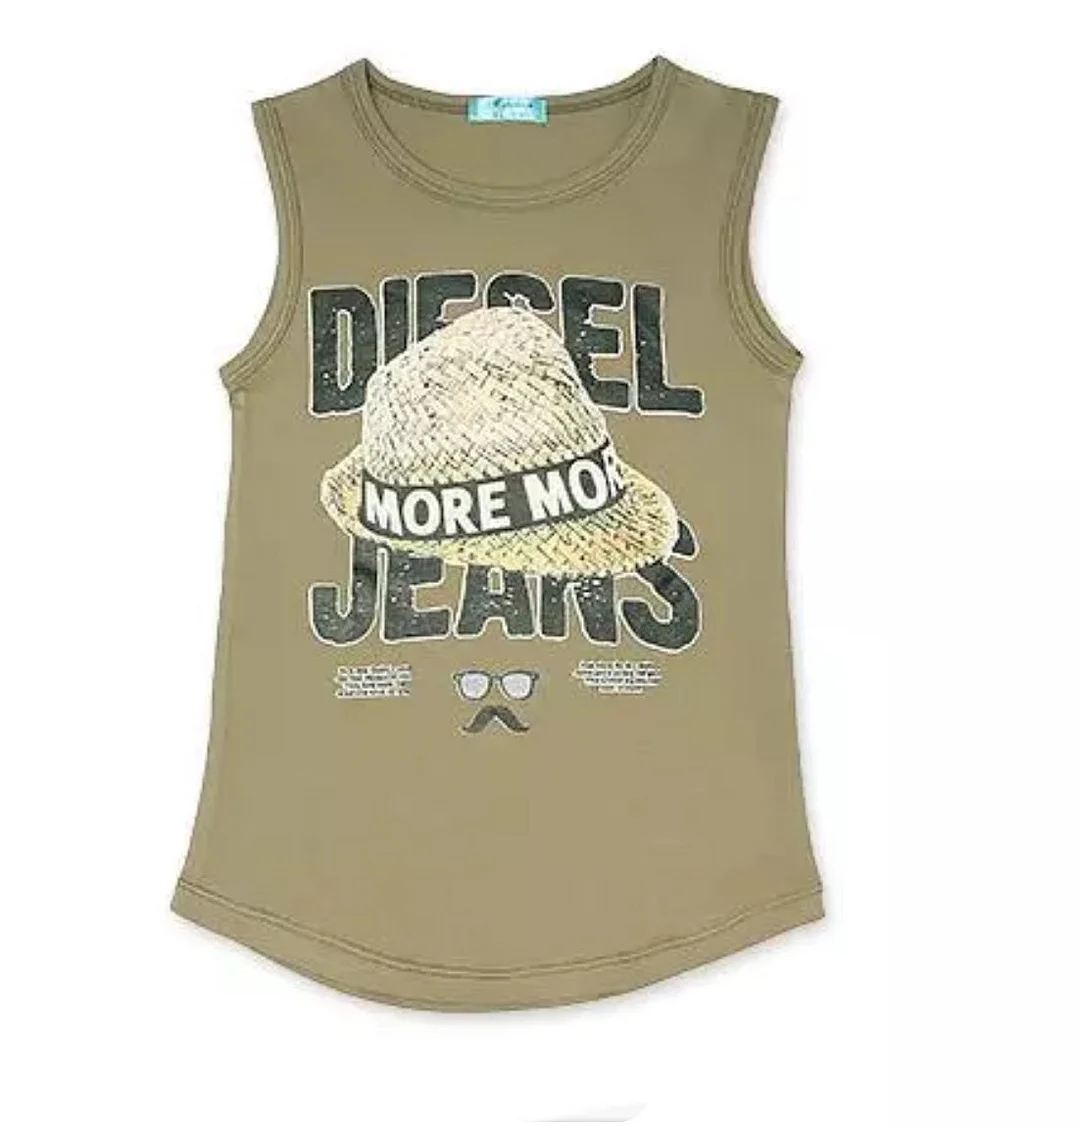 Boys Vest Diesel Jeans Sleeveless T Shirt Printed Clothes